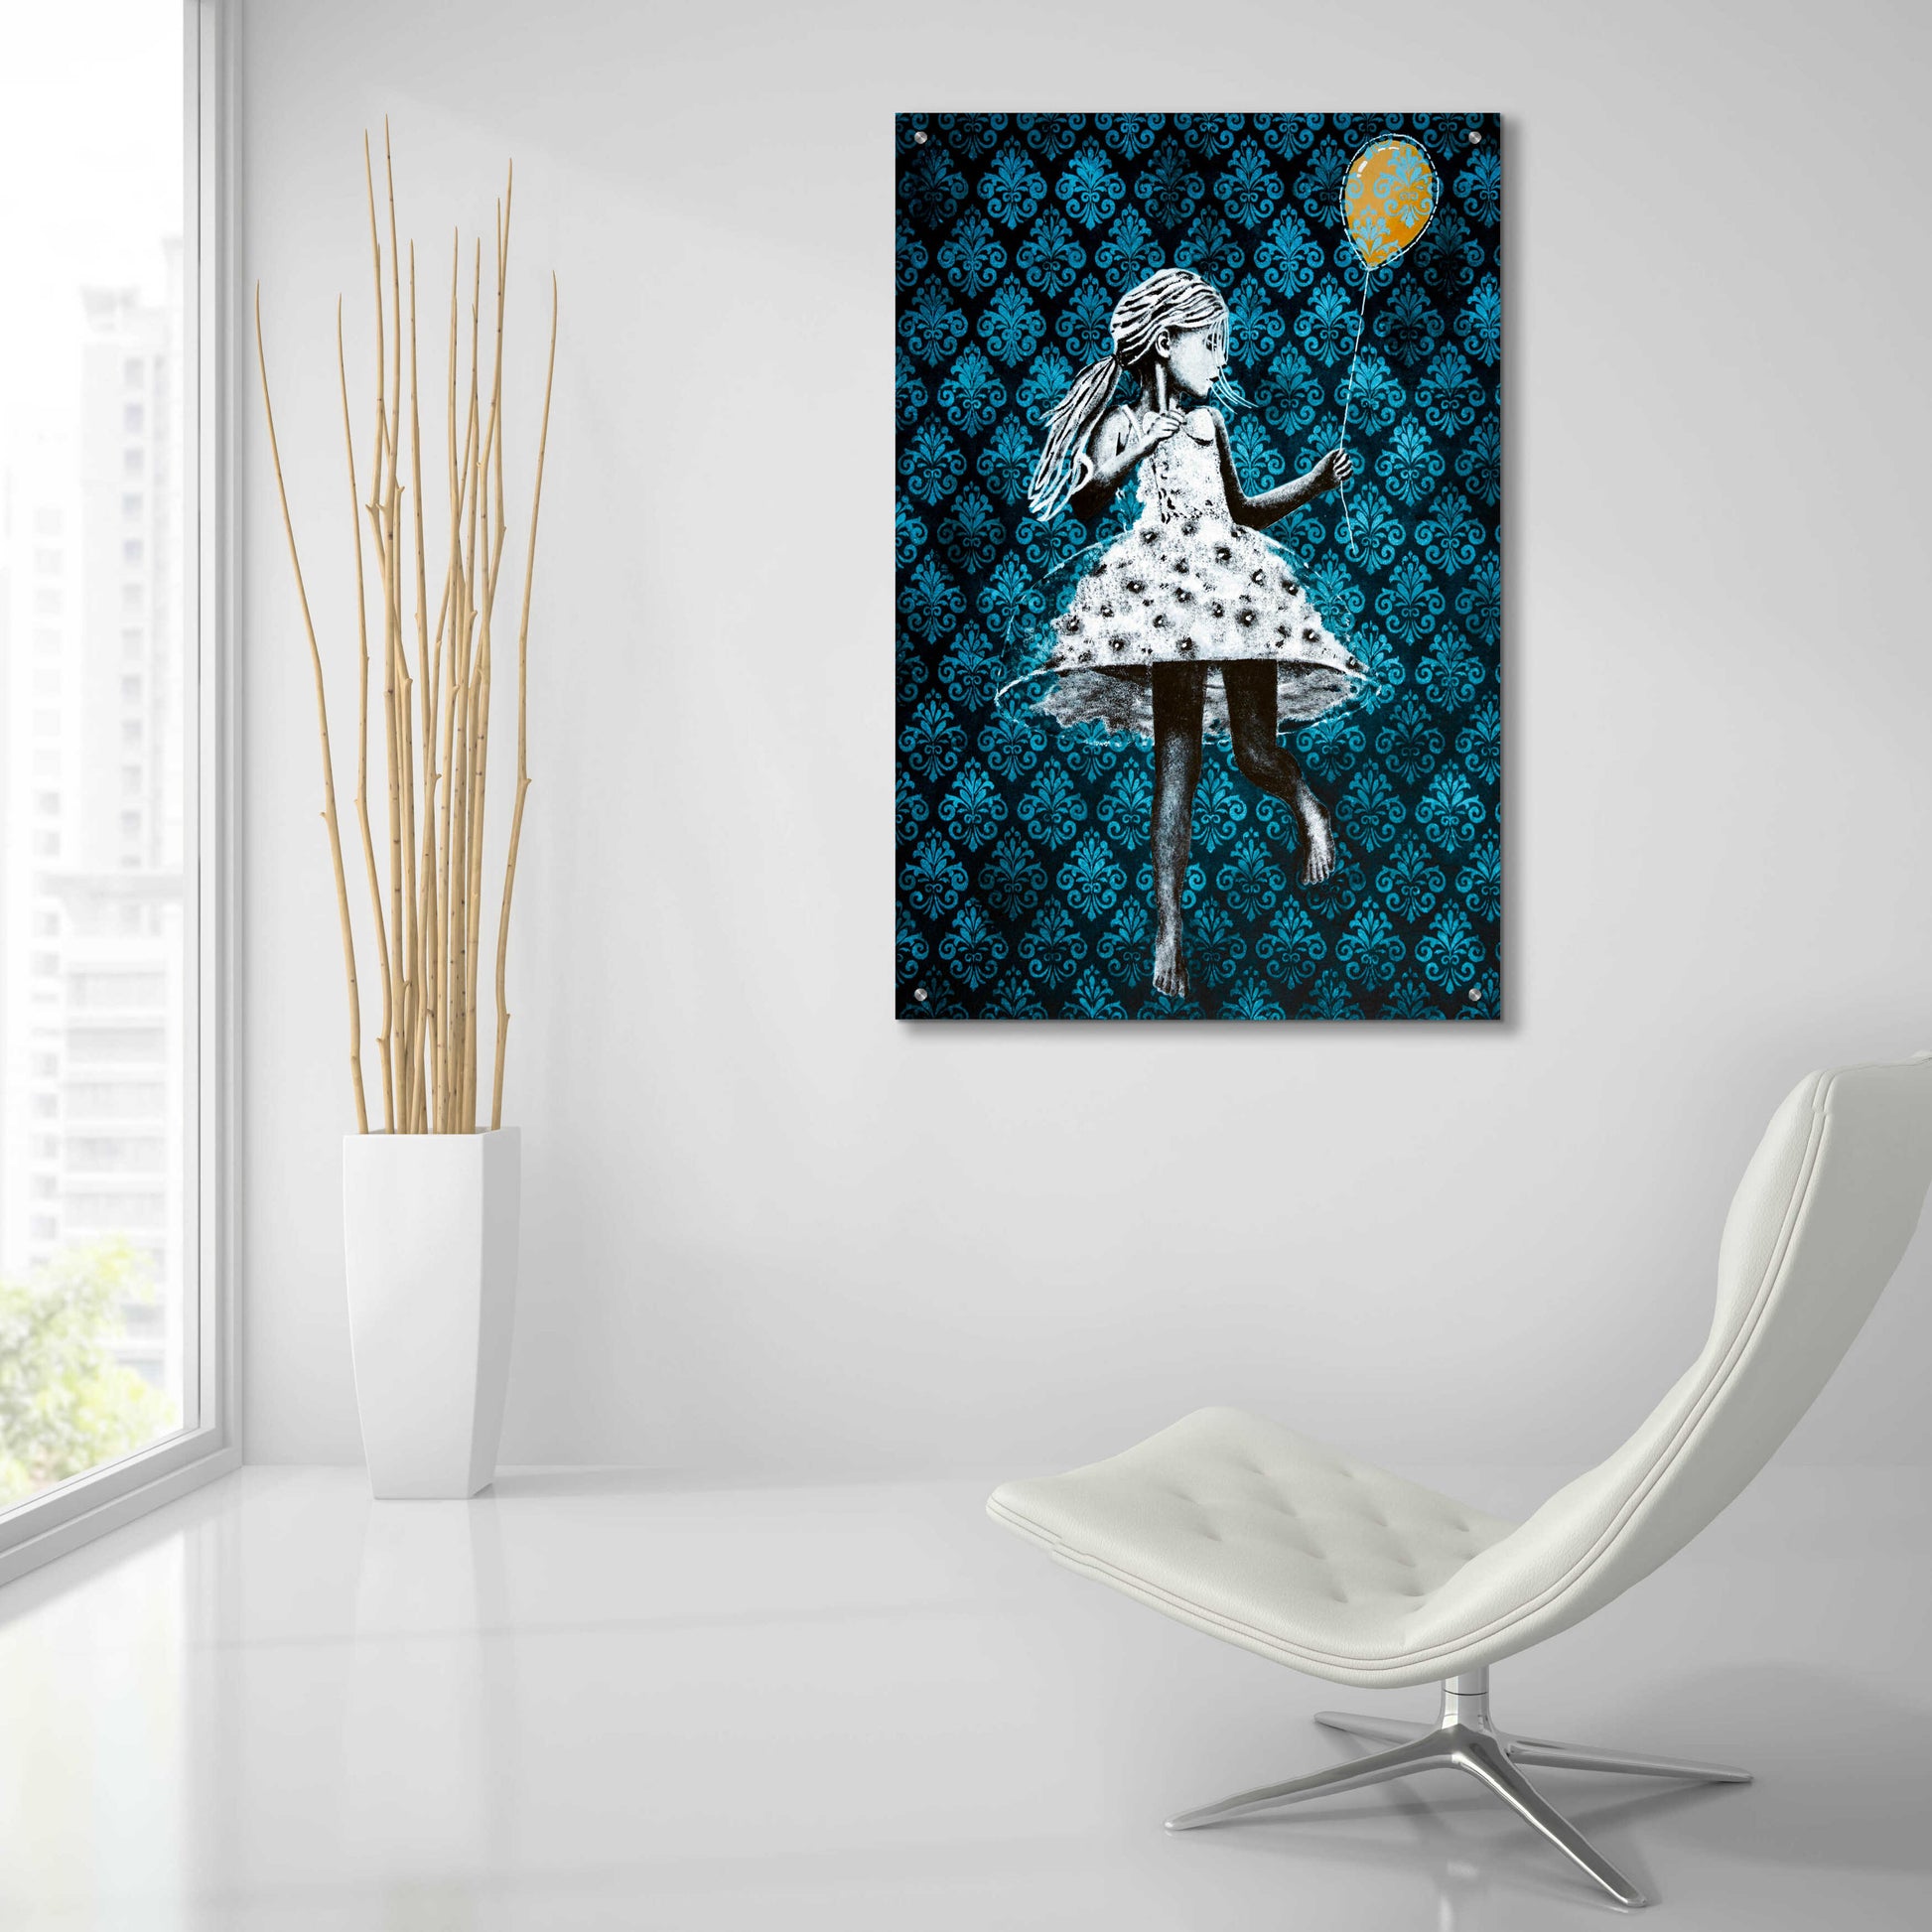 Epic Art 'IN THE MOOD FOR DANCING' by DB Waterman,24x36